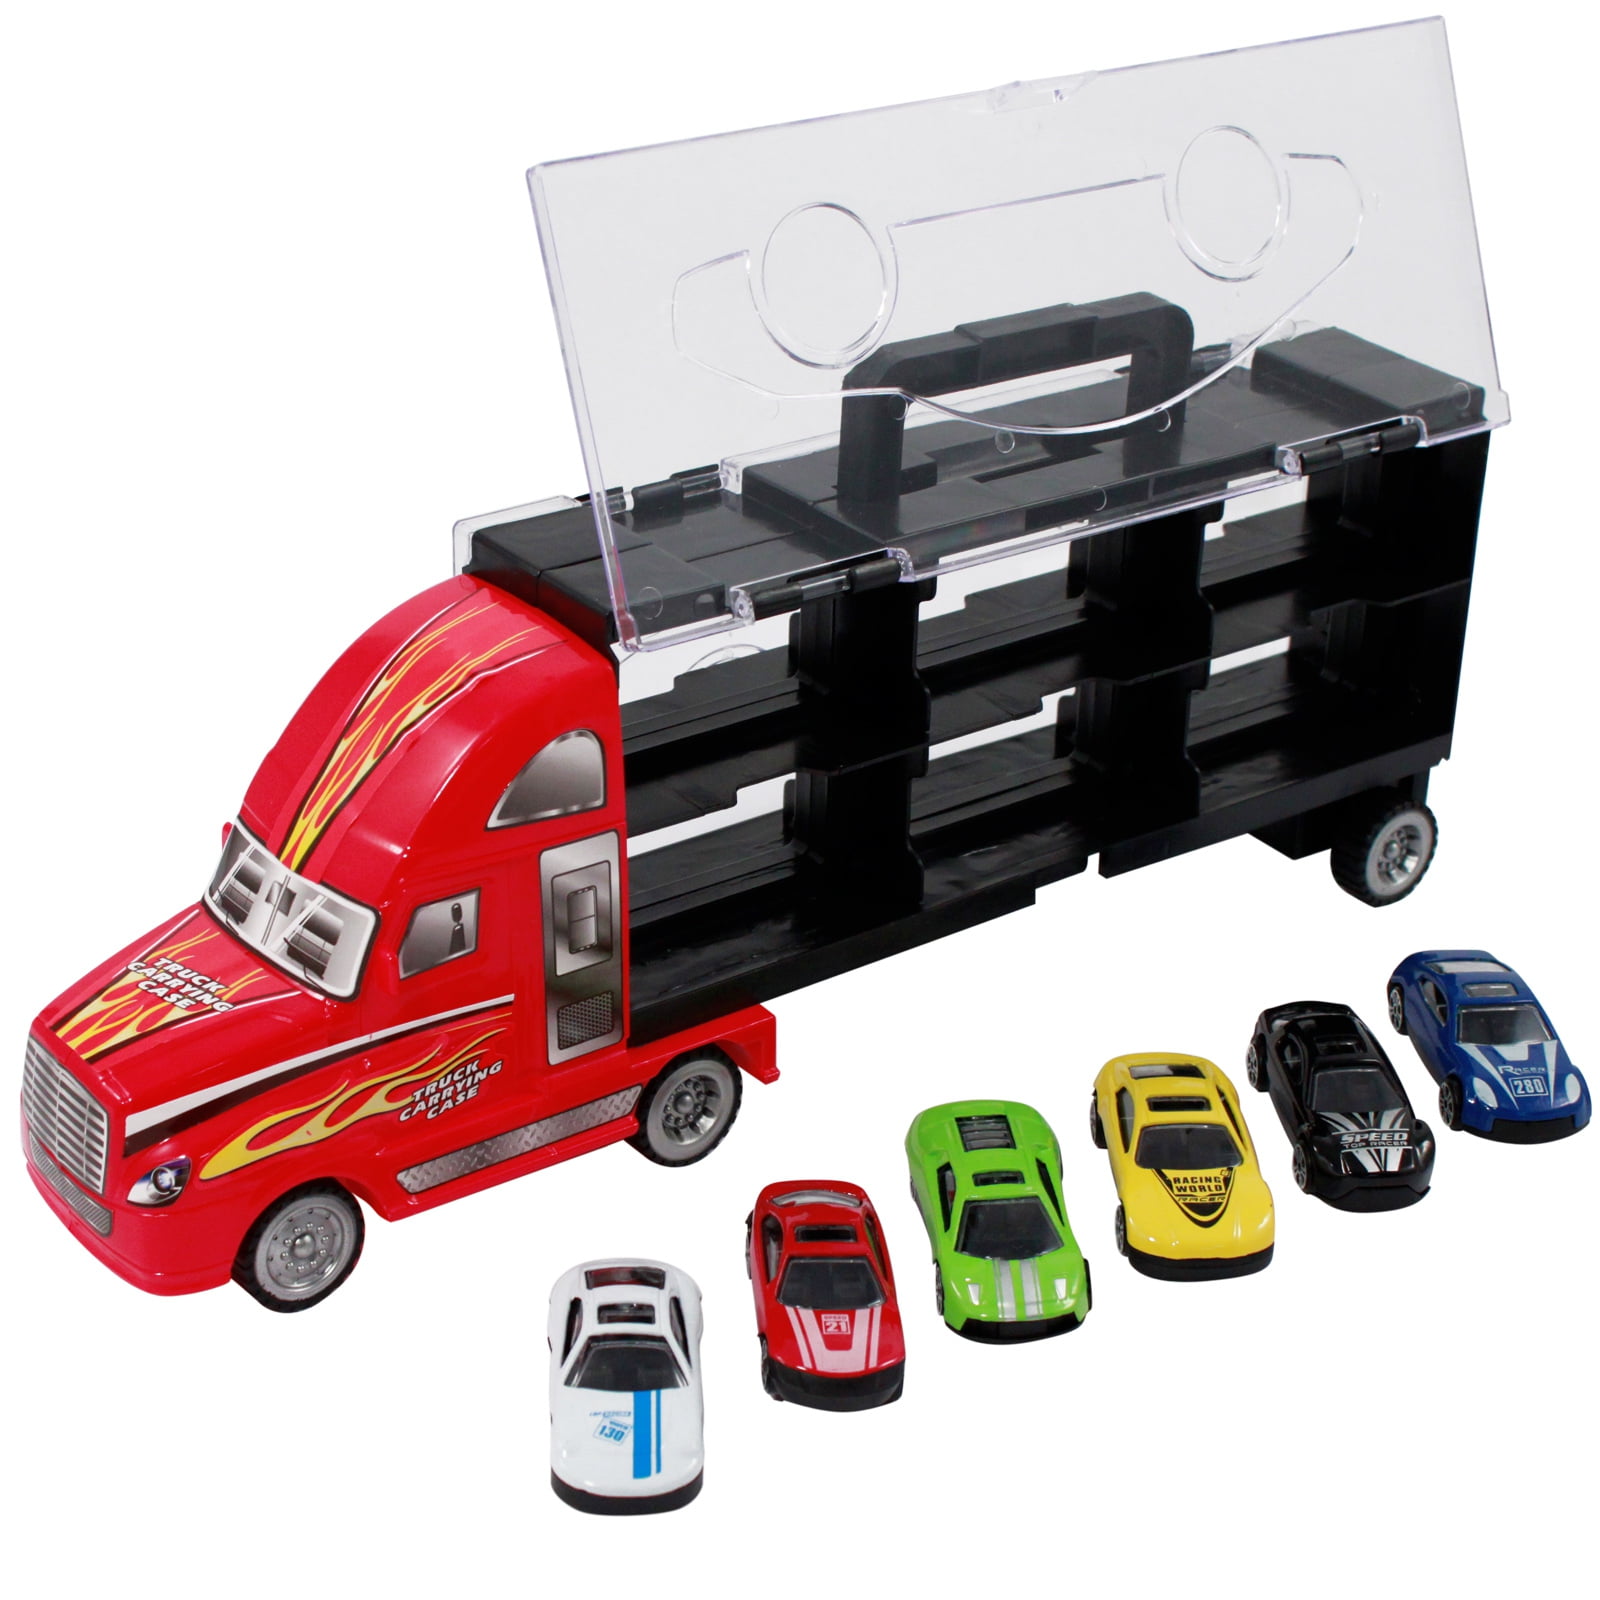 17/13 in 1 Toy  Transport Tractor Trailer Car Collection Carrier Case    HQ 